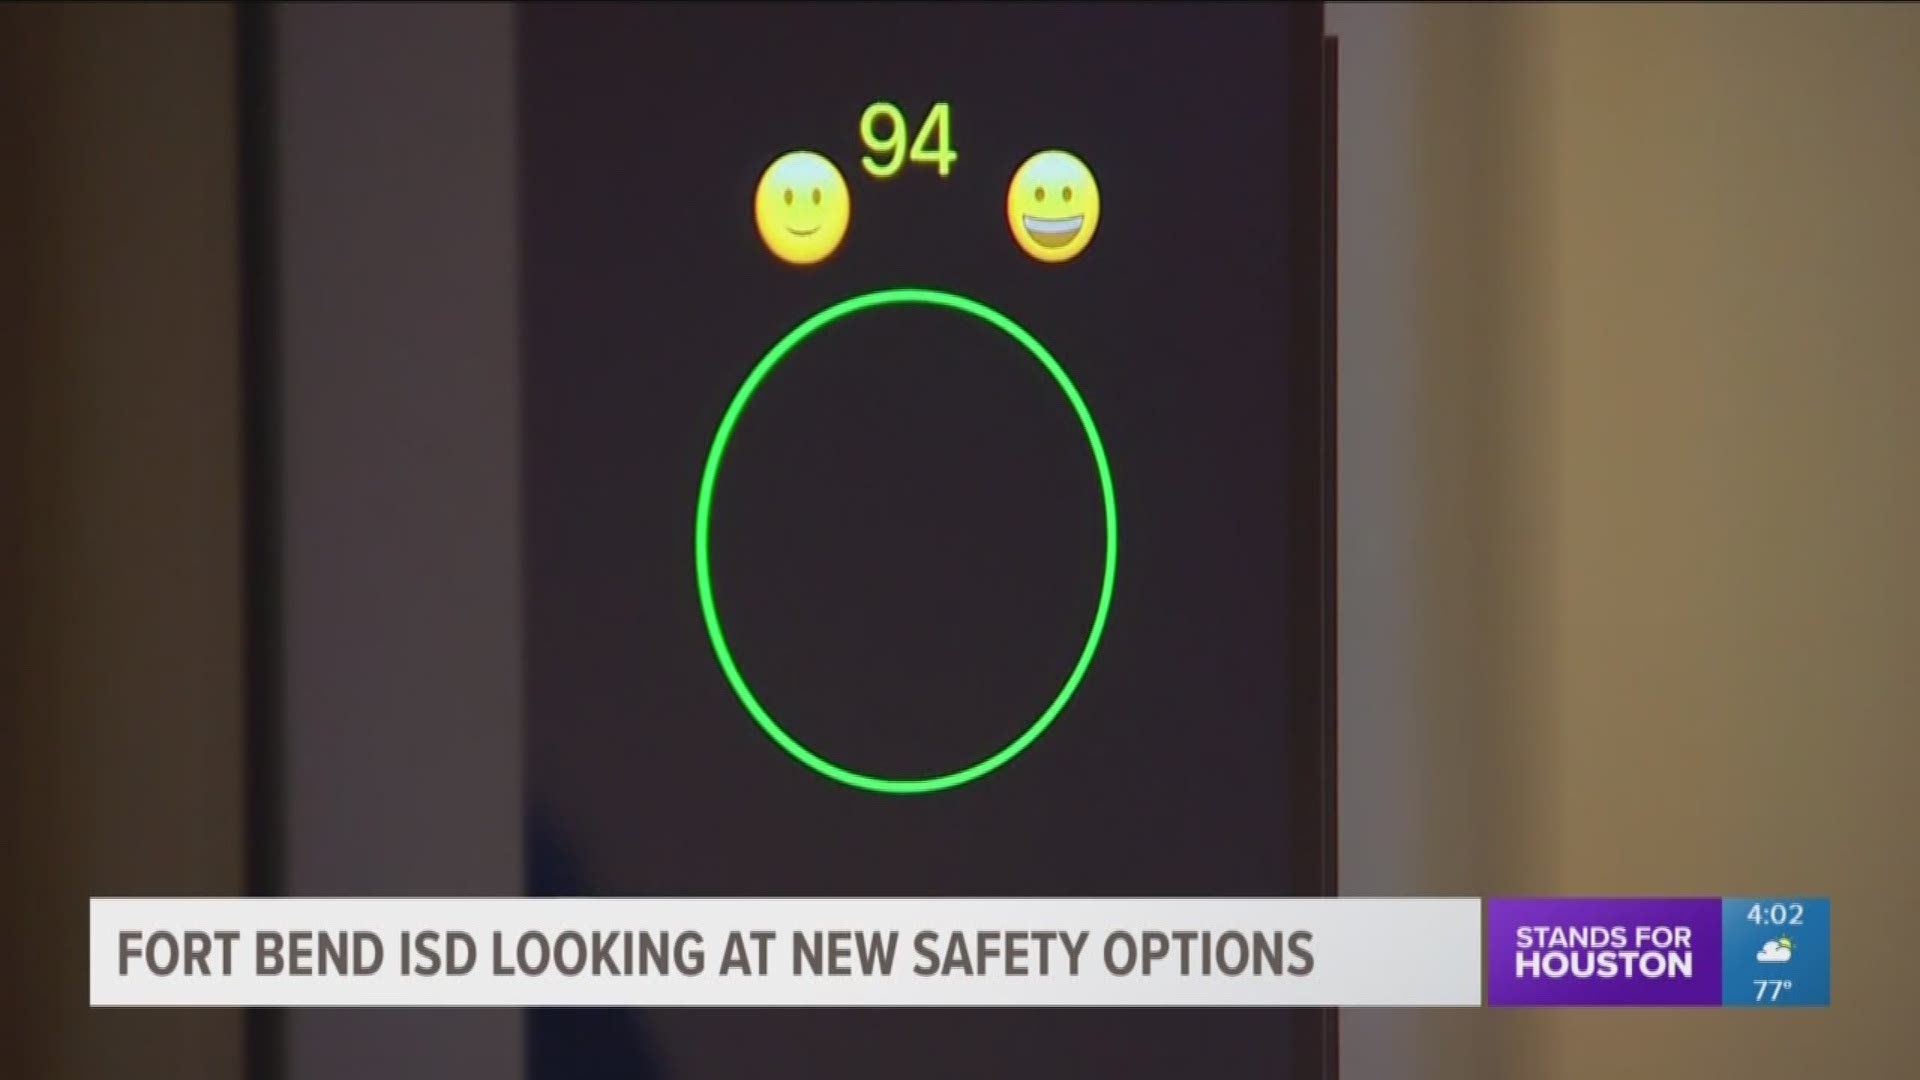 Facial recognition software just might be the newest hall monitor for Fort Bend ISD, it's one of the ways the district is looking at to improve security. 